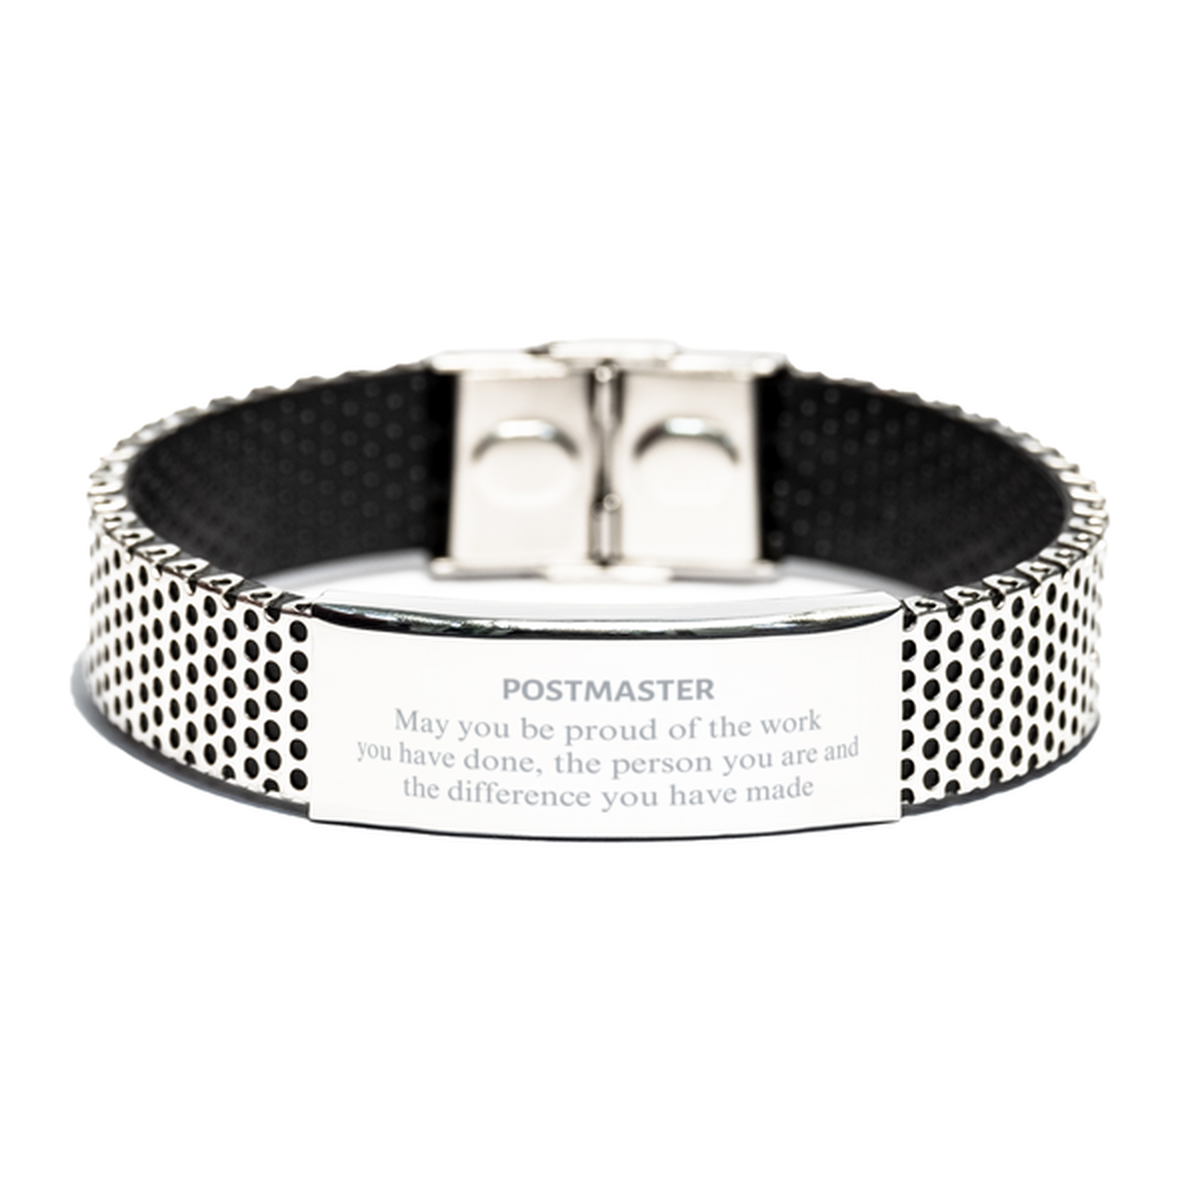 Postmaster May you be proud of the work you have done, Retirement Postmaster Stainless Steel Bracelet for Colleague Appreciation Gifts Amazing for Postmaster